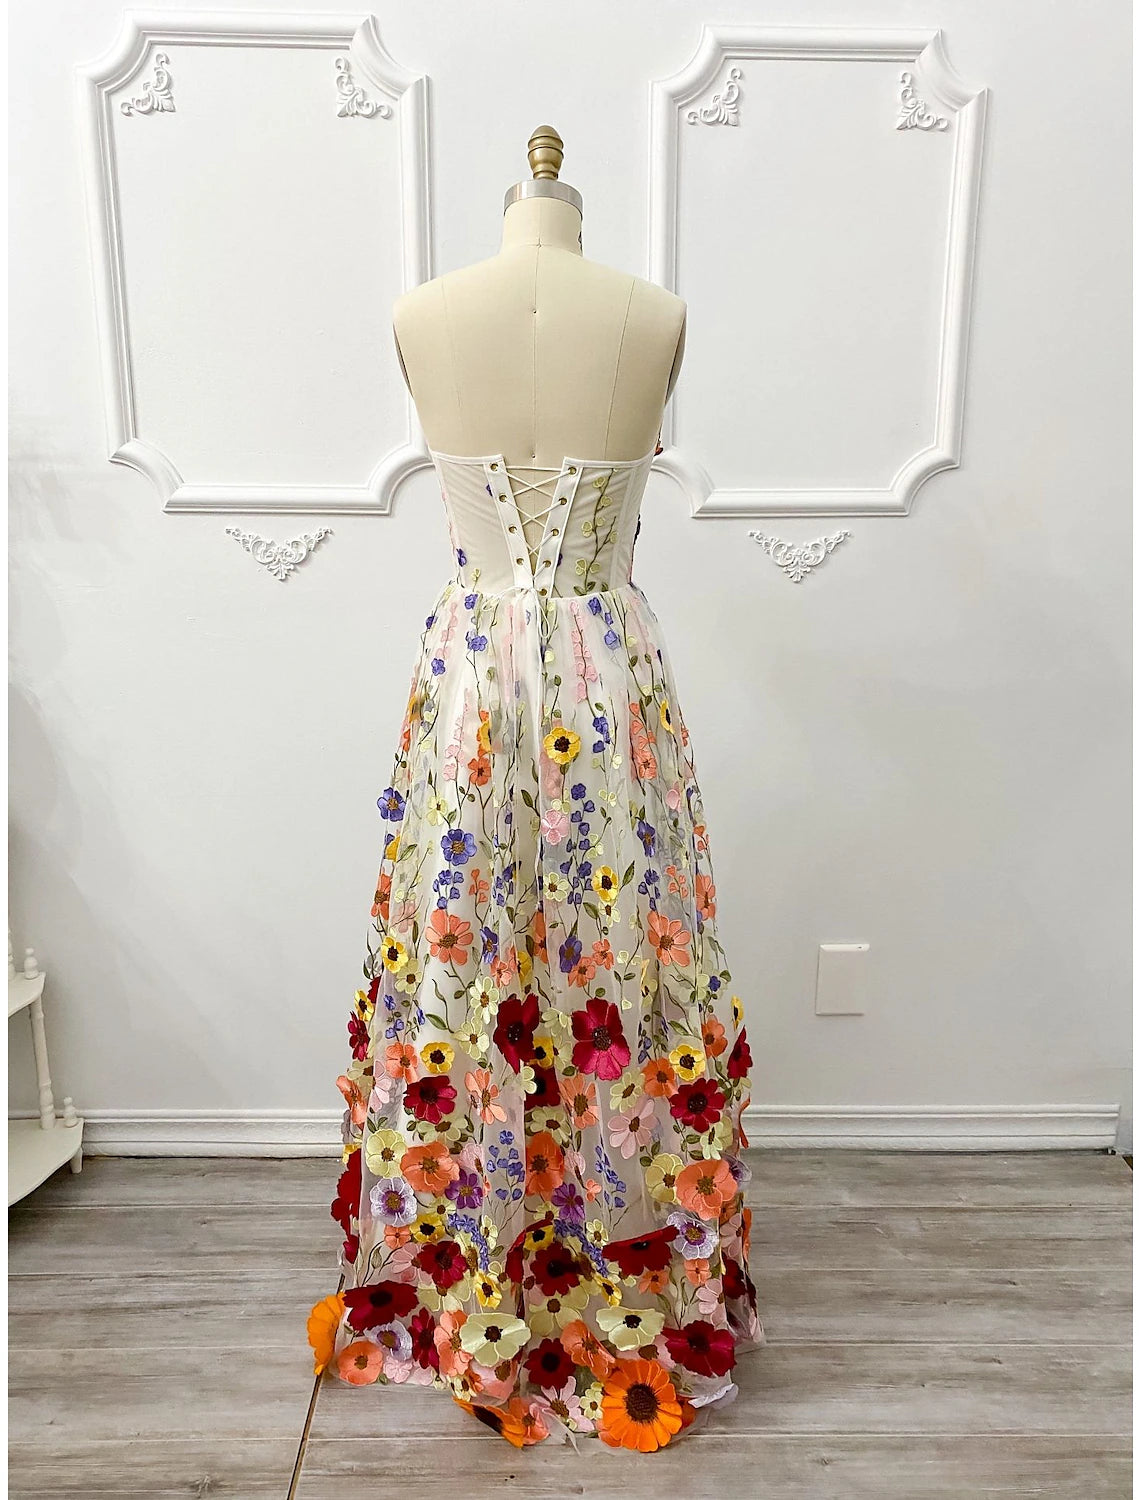 A-Line Wedding Guest Dresses Floral Dress Wedding Guest Floor Length Sleeveless Illusion Neck Wednesday Addams Family Cotton Backless with Embroidery Appliques